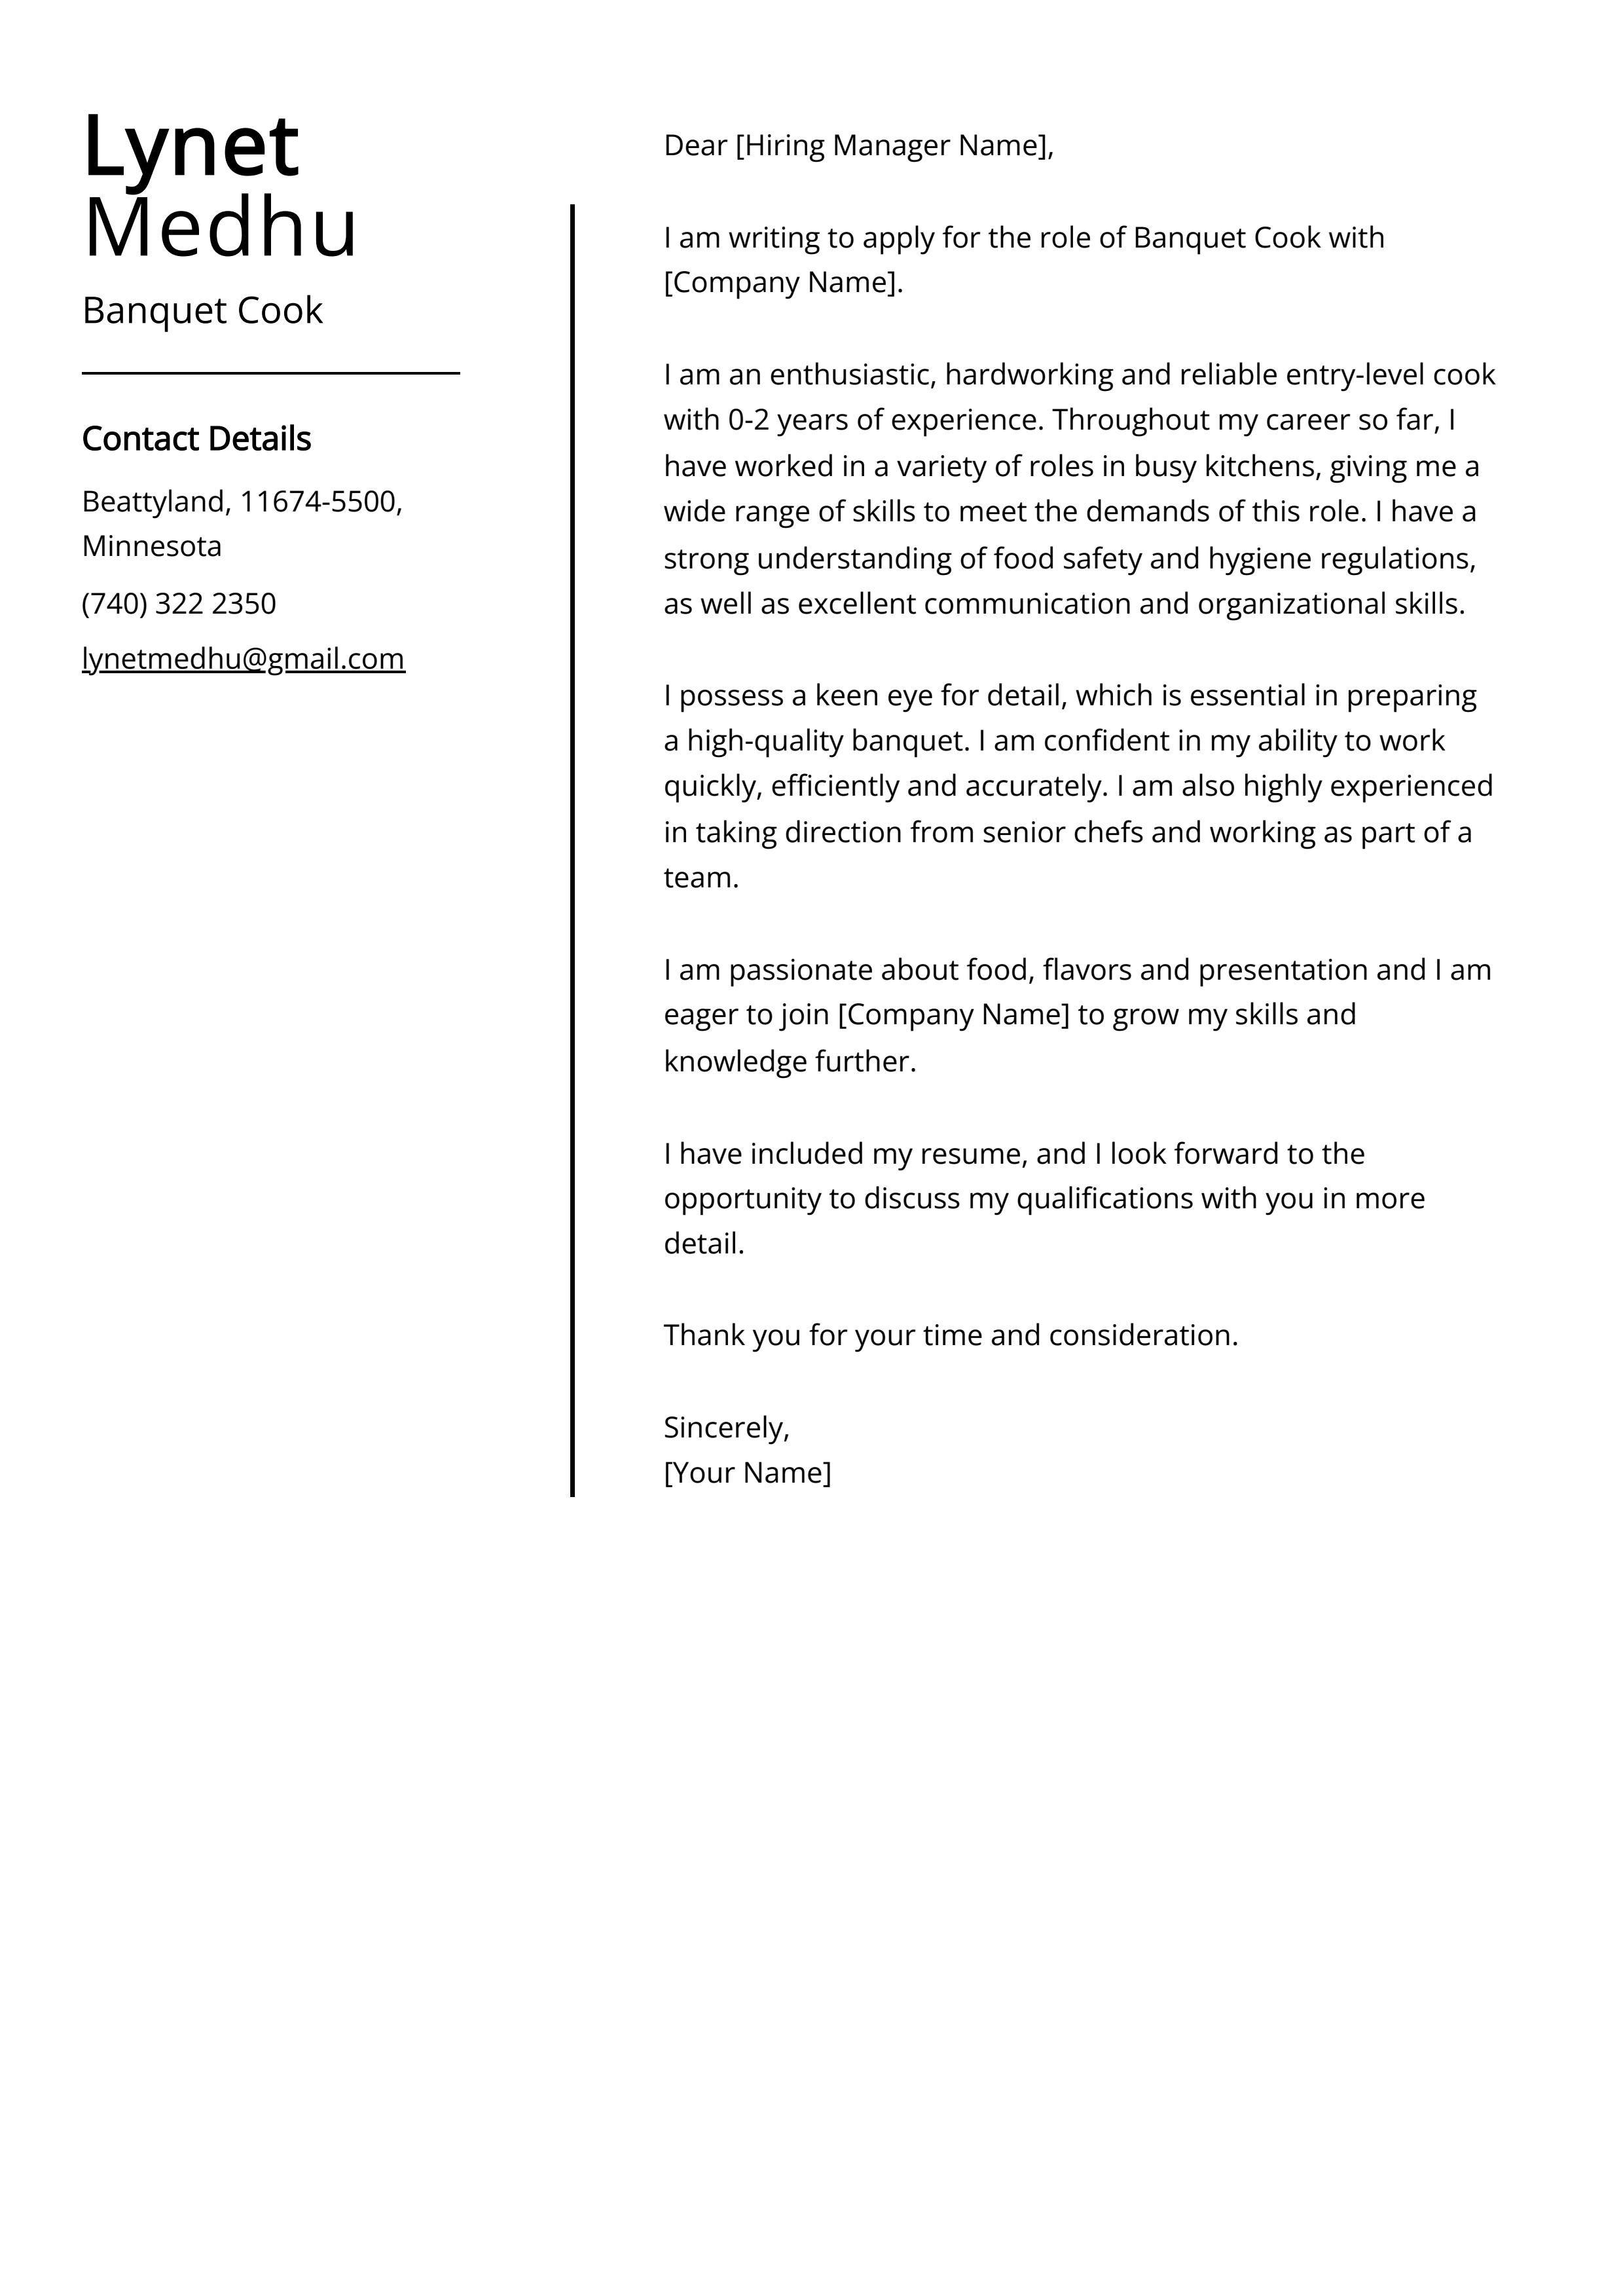 Banquet Cook Cover Letter Example